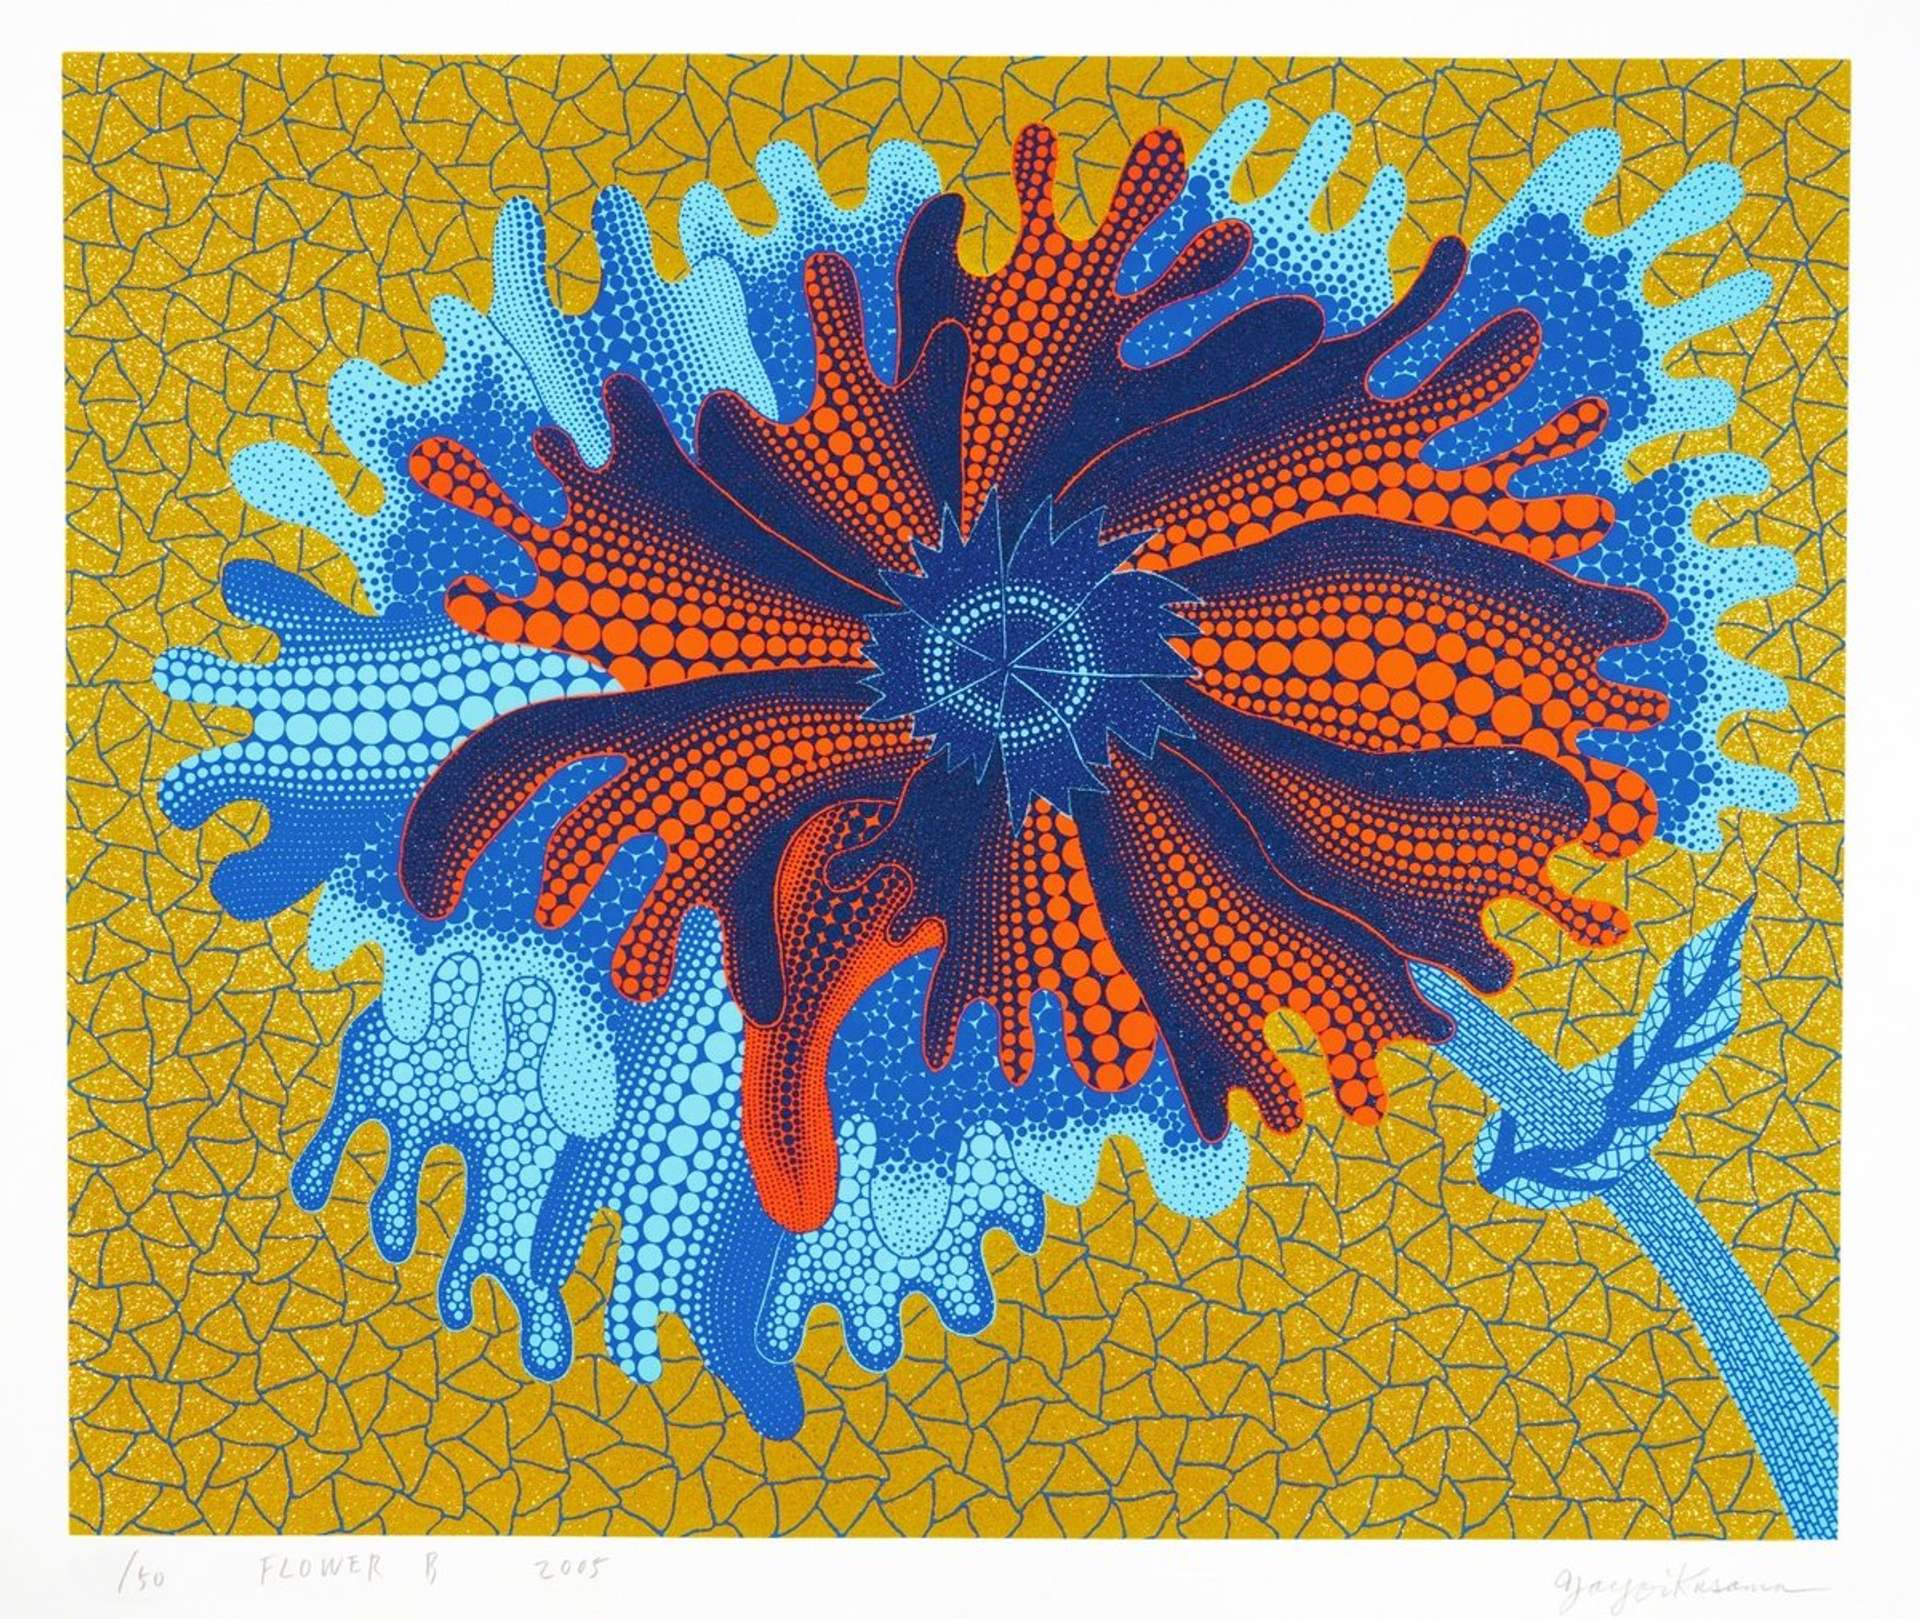 Yayoi Kusama’s Flower B. A screenprint of a flower comprising various shades of blue and orange polka dots against a yellow, geometric background.